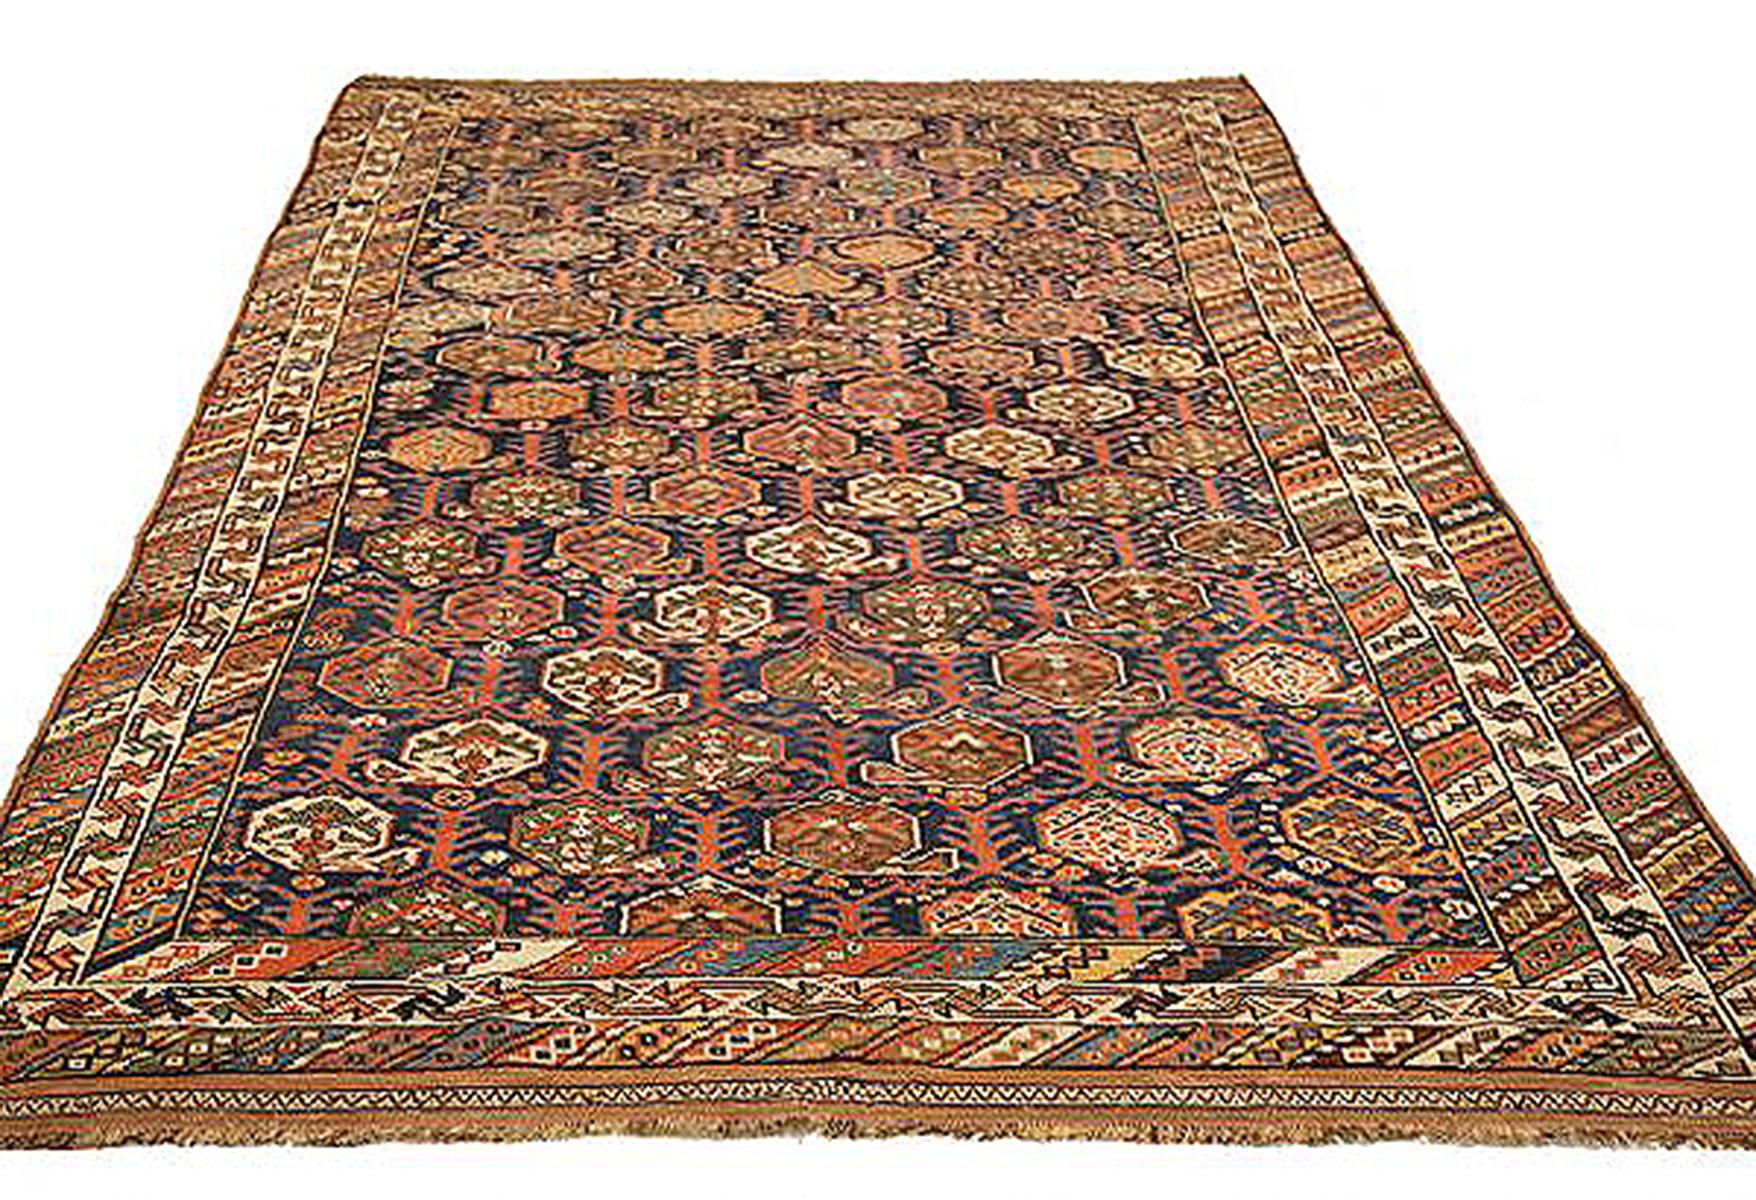 Antique Persian rug handwoven from the finest sheep’s wool and colored with all-natural vegetable dyes that are safe for humans and pets. It’s a traditional Shiraz design featuring green and brown floral medallions over a mix of black and navy